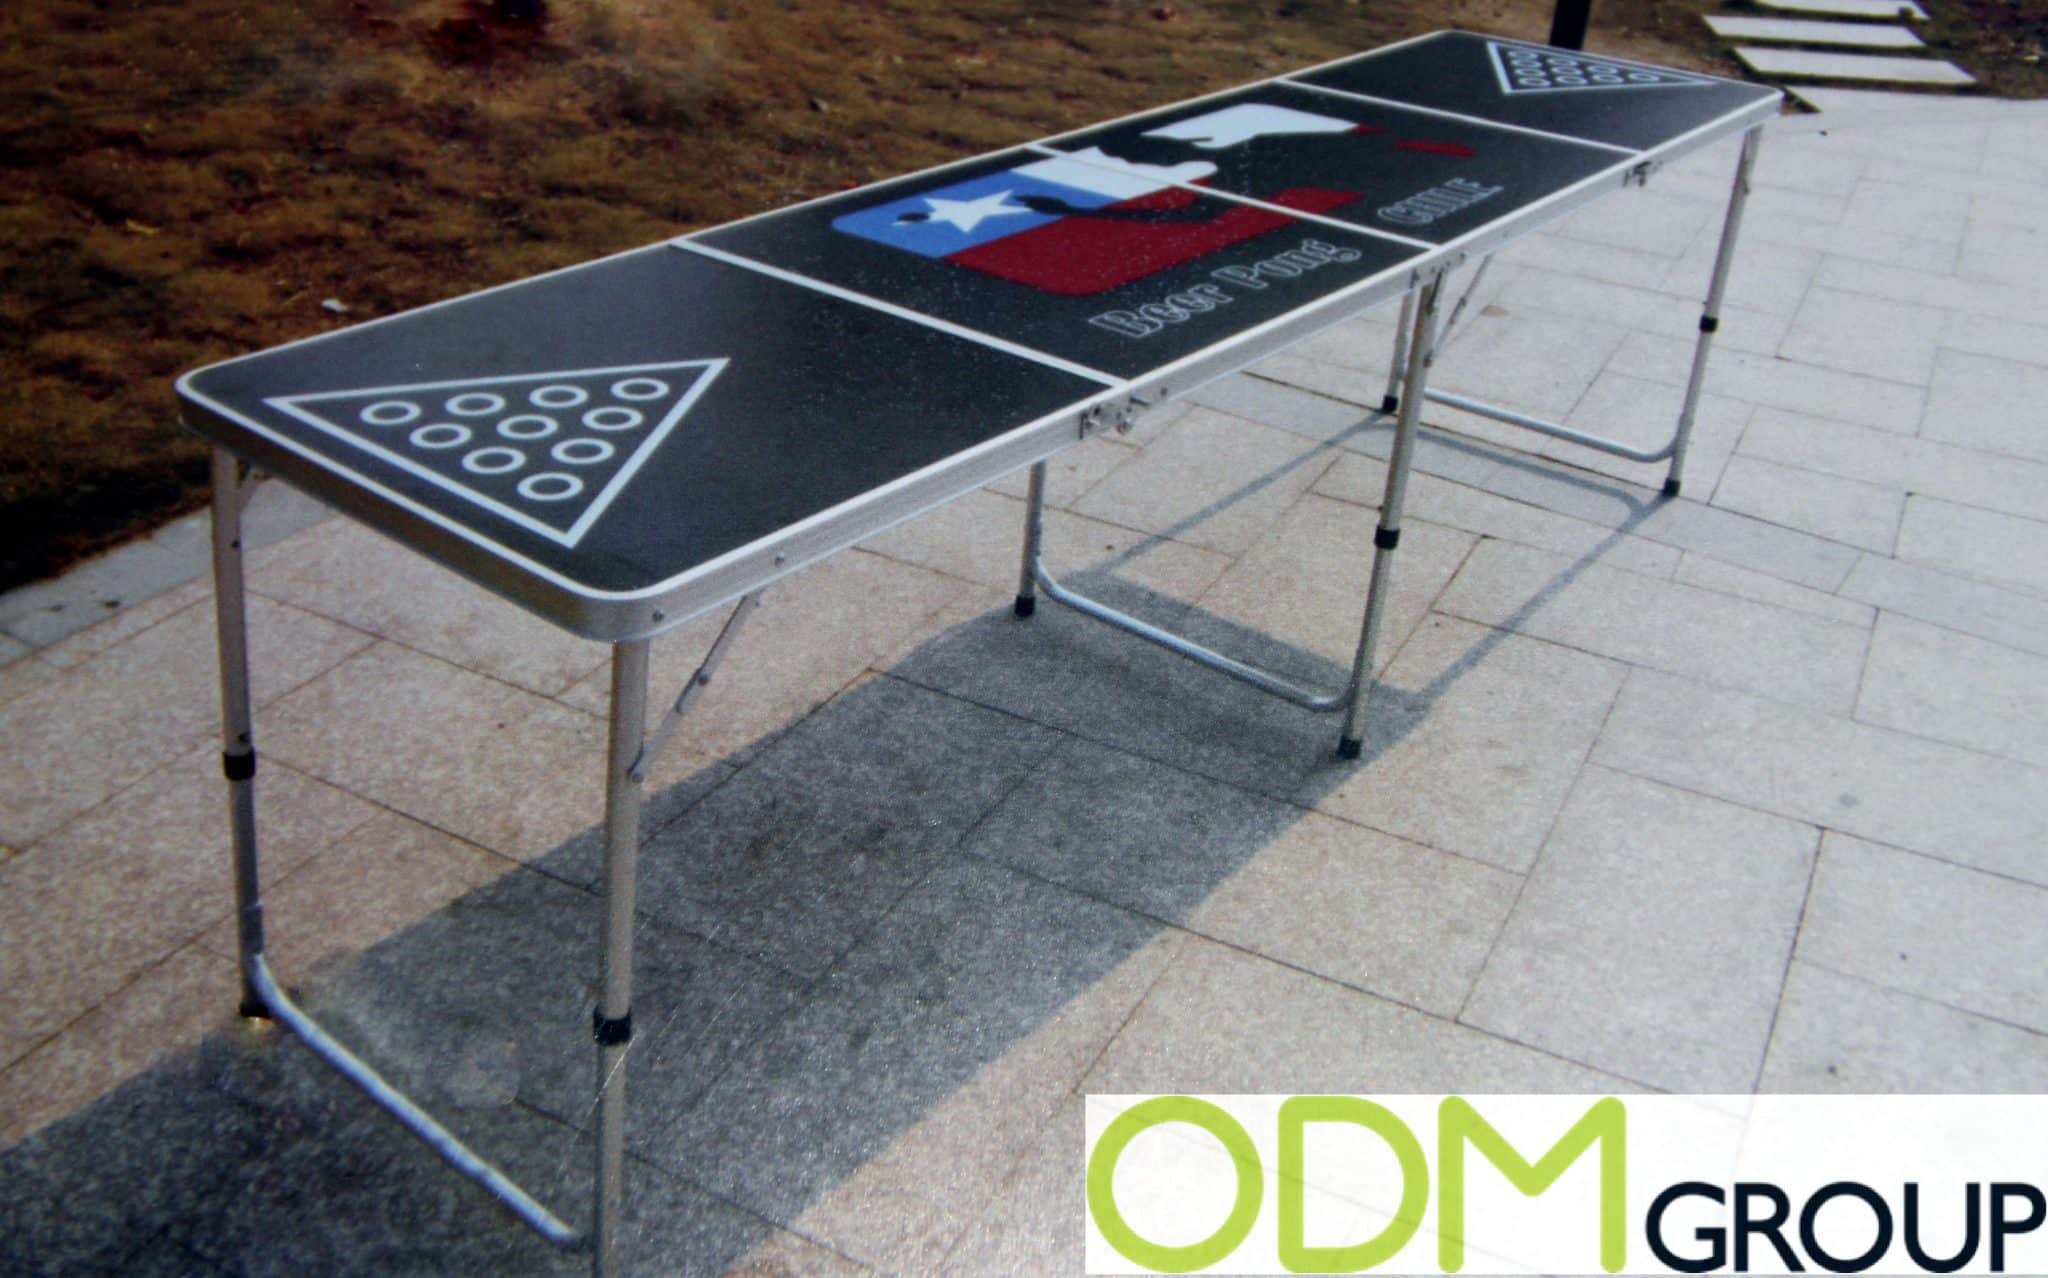 https://www.theodmgroup.com/wp-content/uploads/2015/11/Unique-Promotional-Ideas-Branded-Beer-pong-table1.jpg